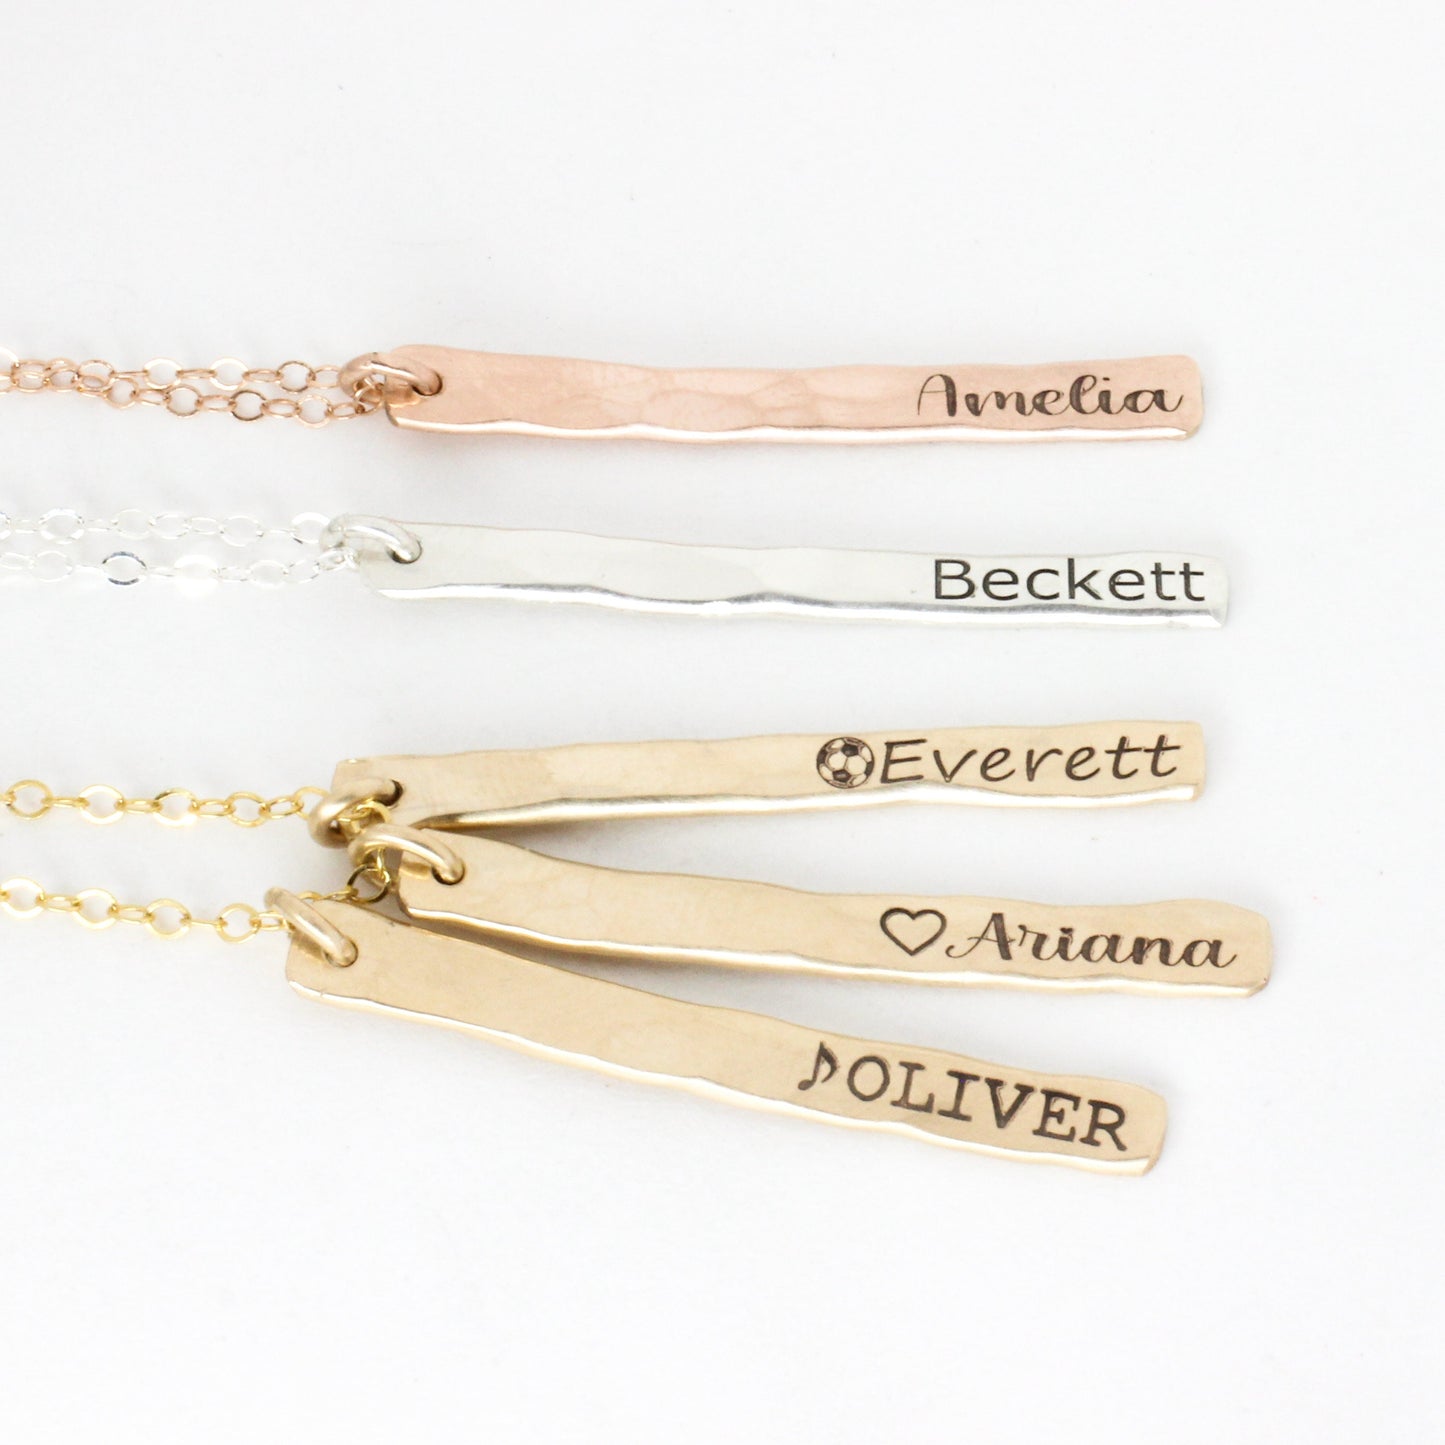 Engraved Bar Necklace in 14k Gold Filled, 14K Rose Gold Filled, or Sterling Silver // Personalized Initial Name Necklace // Bridesmaid Gift